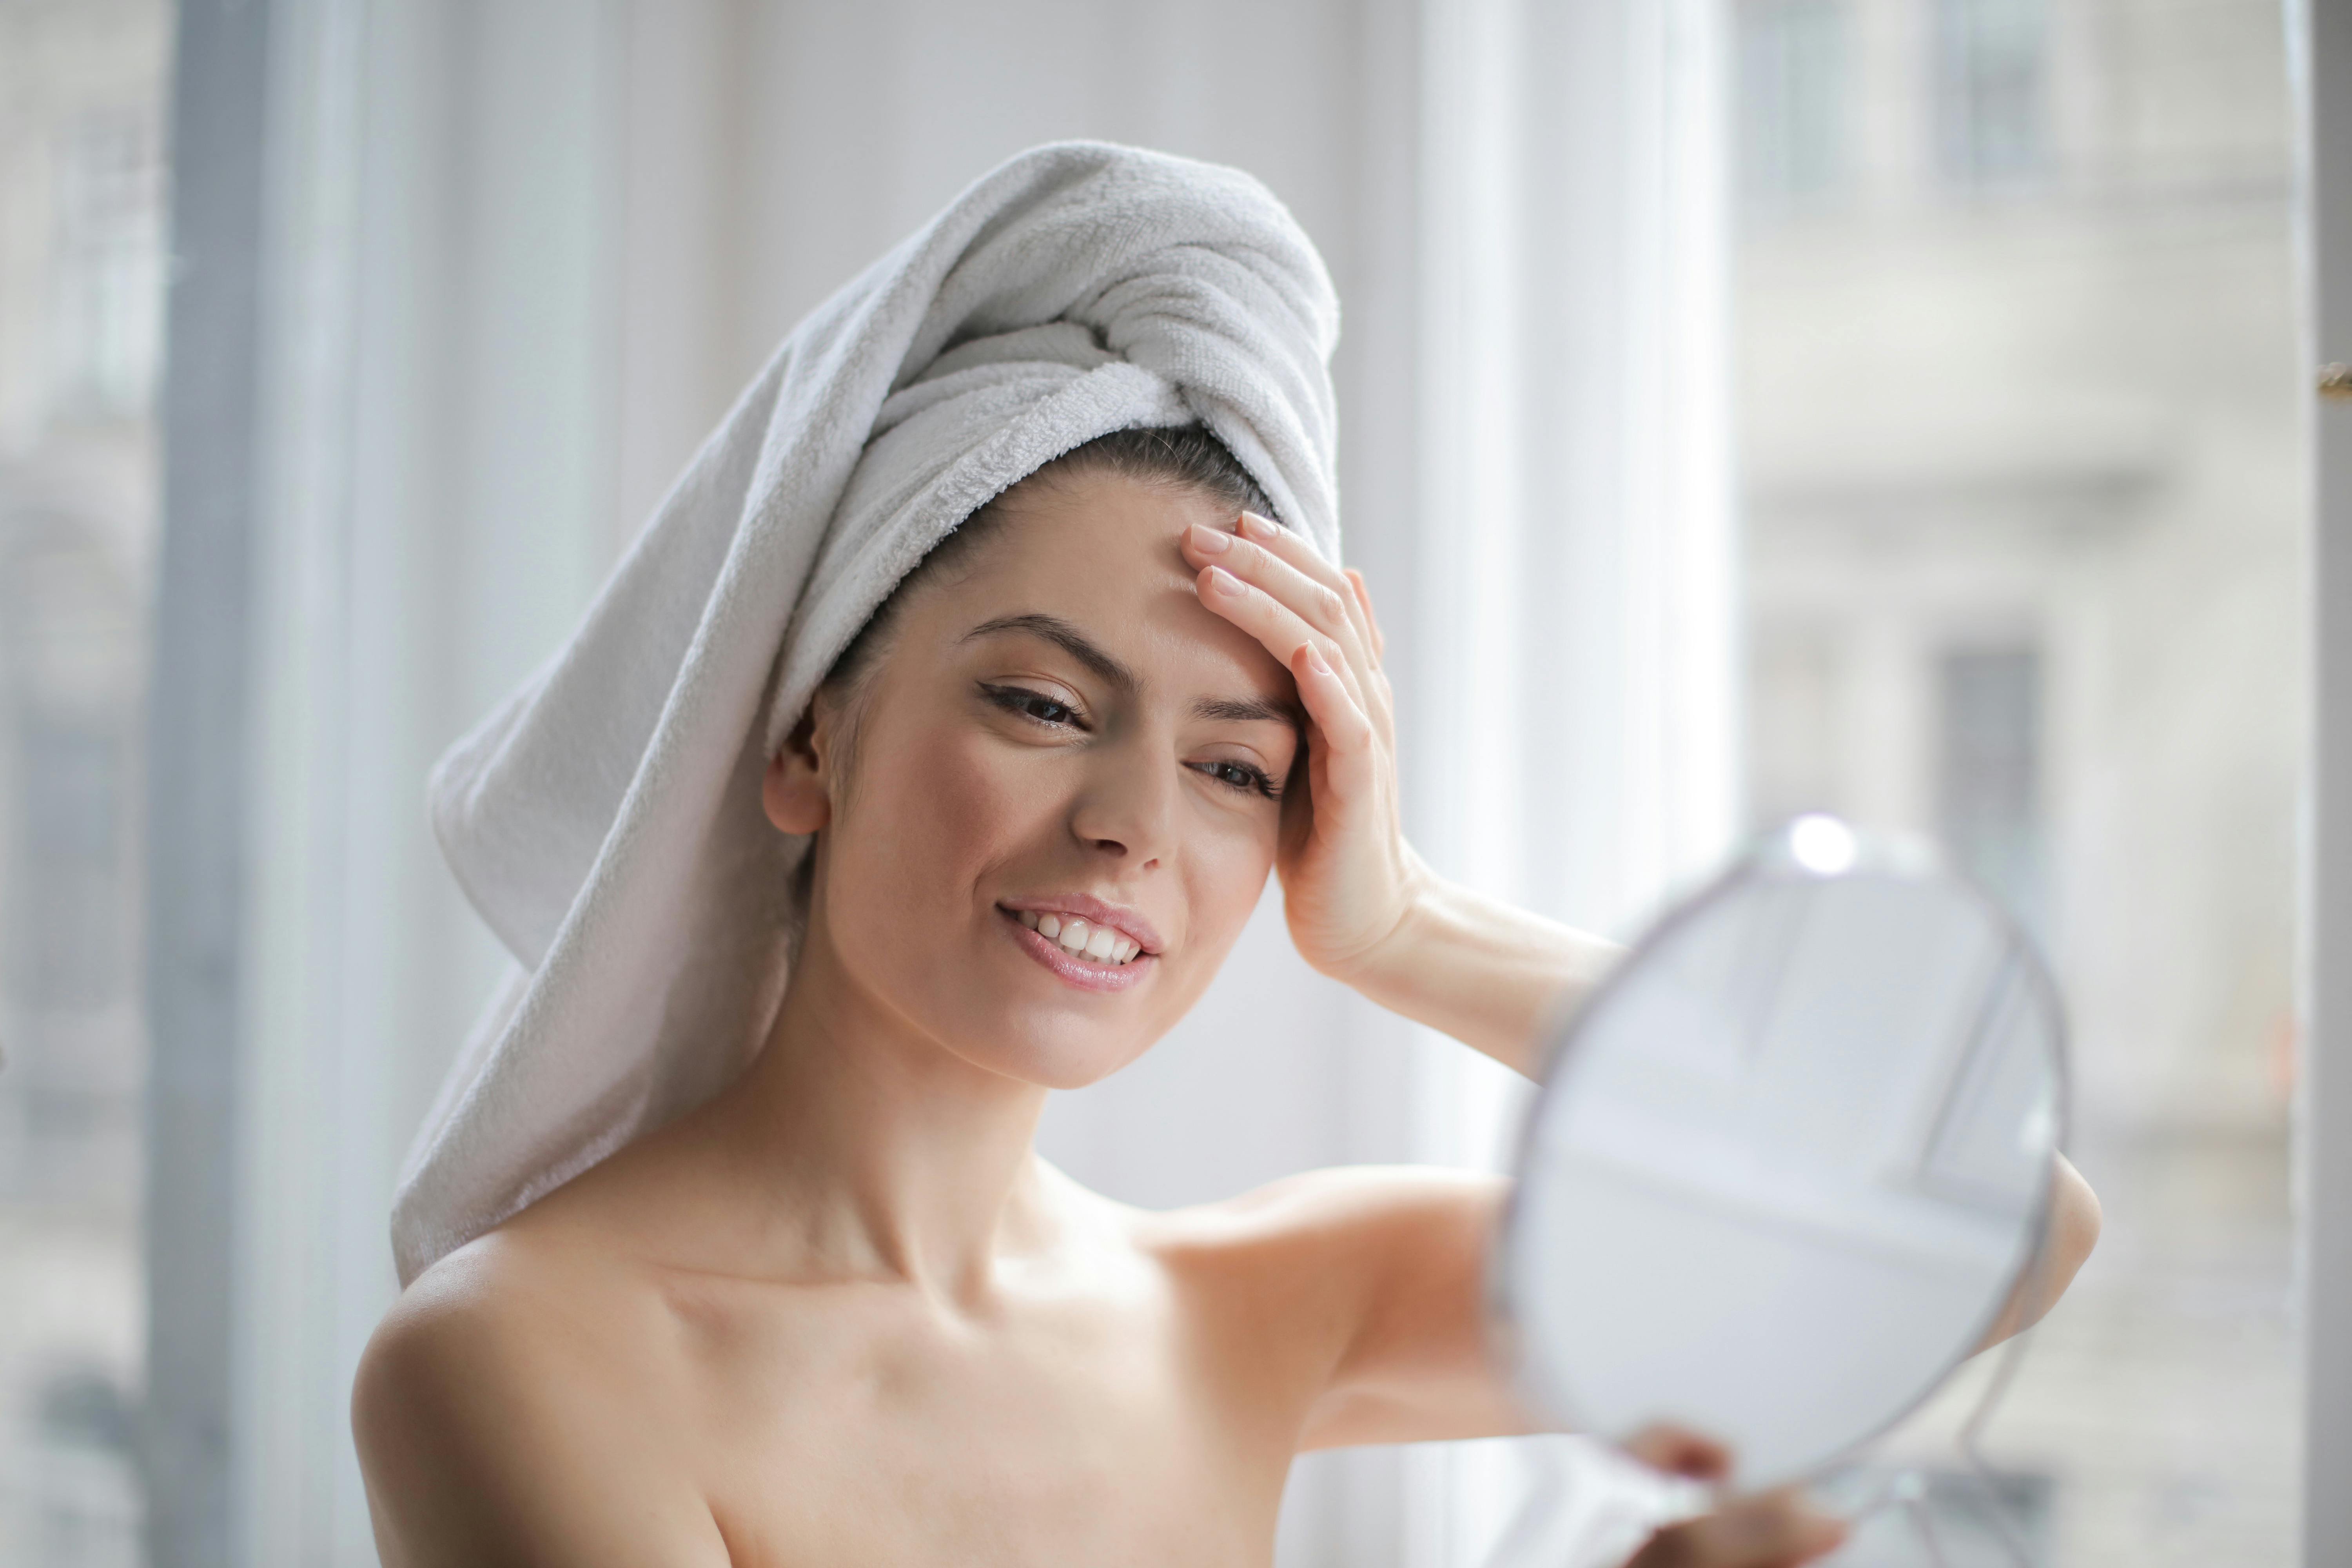 A happy woman looking at herself in the mirror while wearing a towel to dry her hair | Source: Pexels